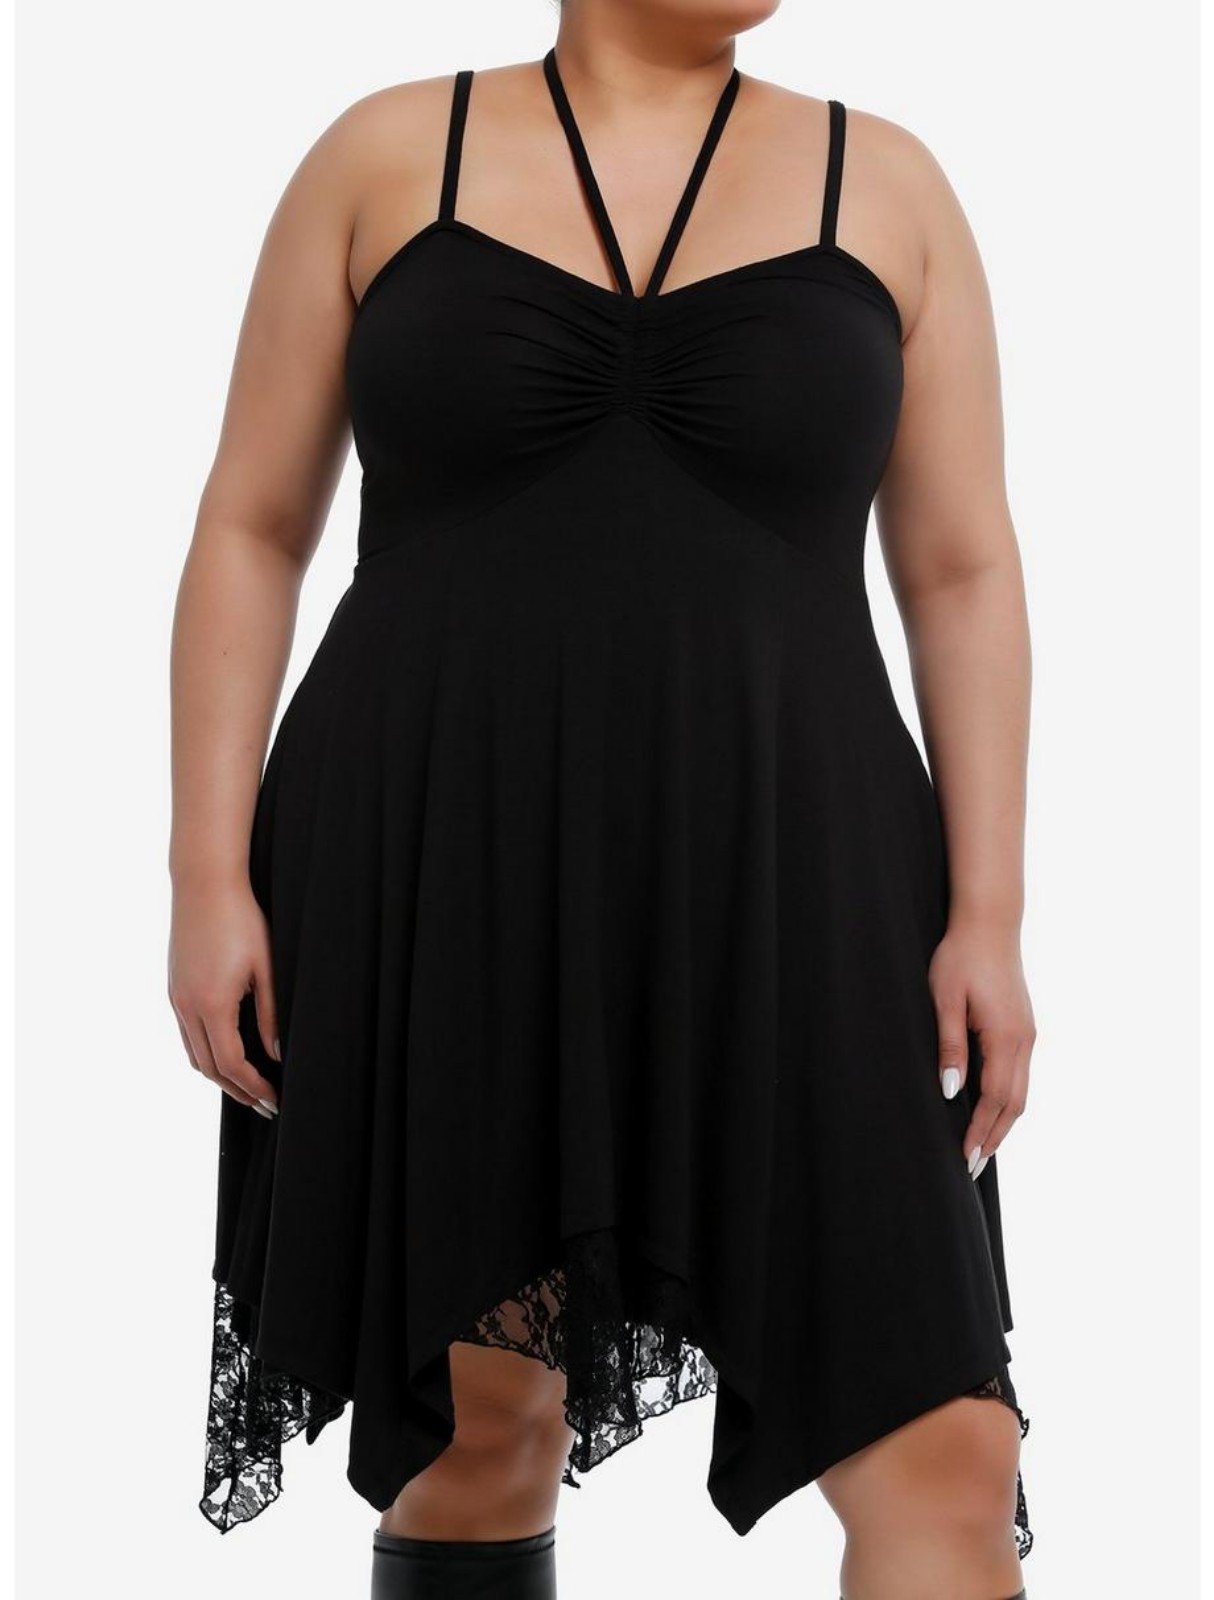 Hot Topic Black Tiered Ruched Halter Dress Plus Size

N